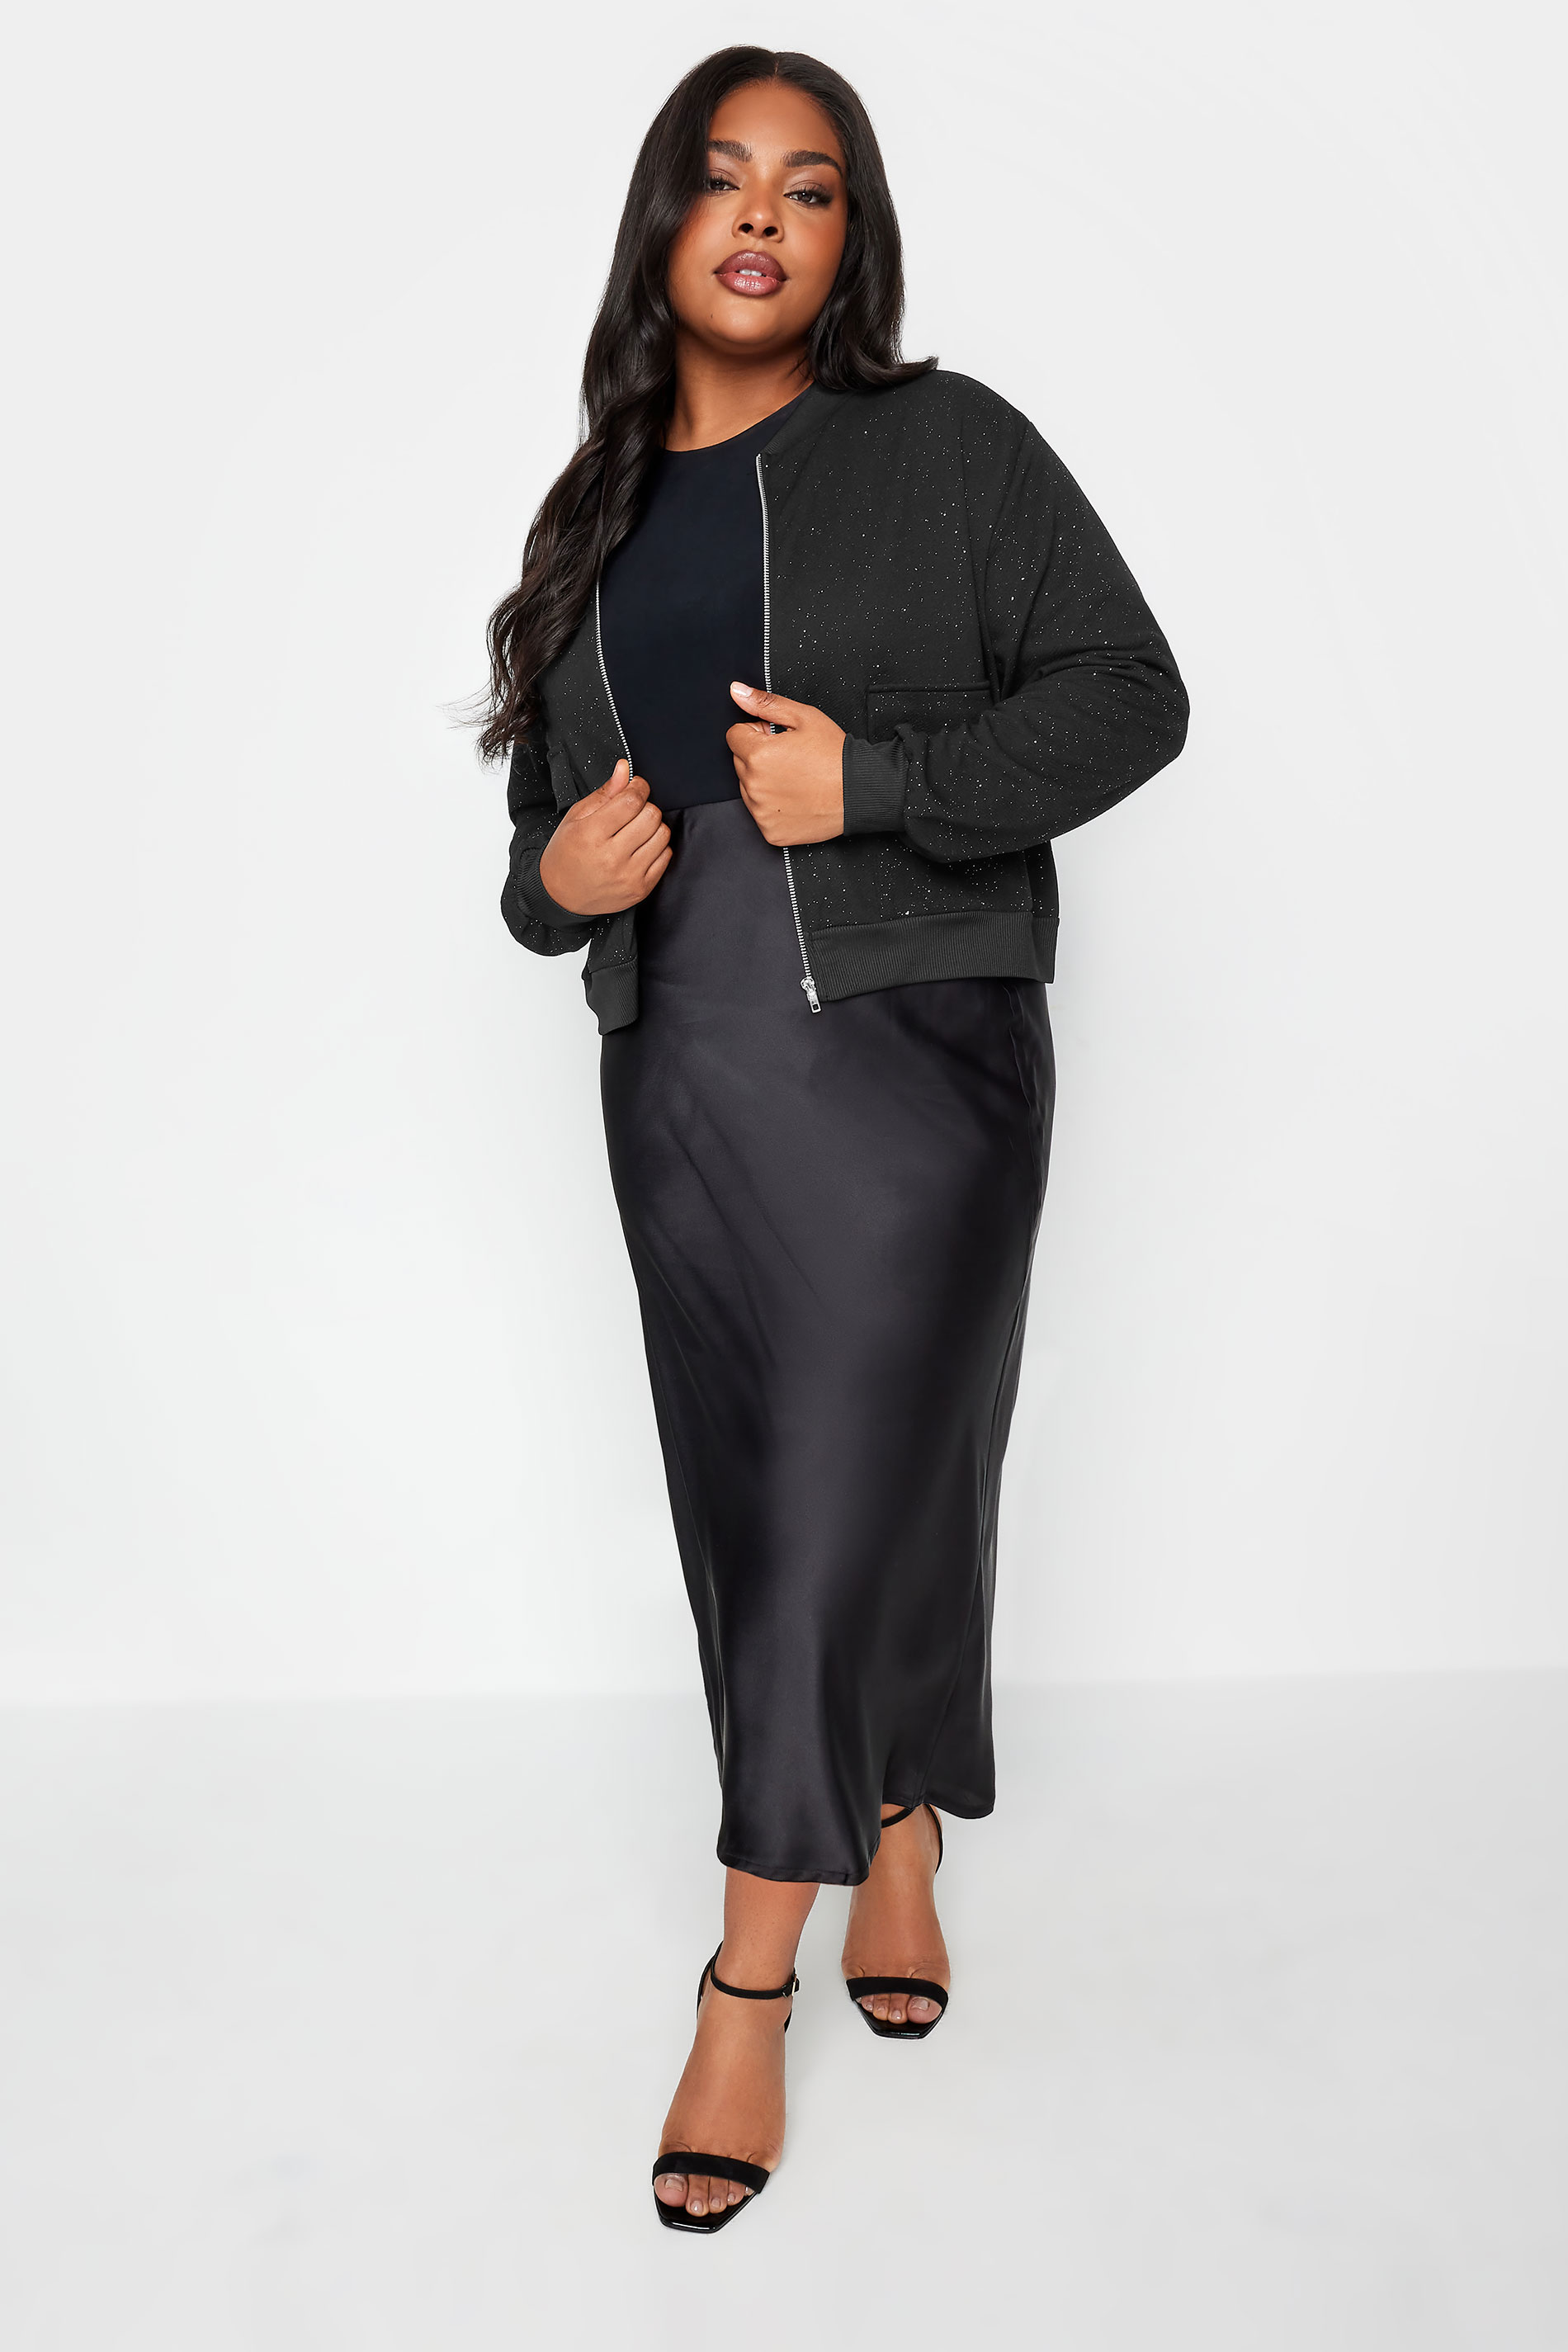 YOURS Plus Size Black Glitter Formal Bomber Jacket | Yours Clothing 3